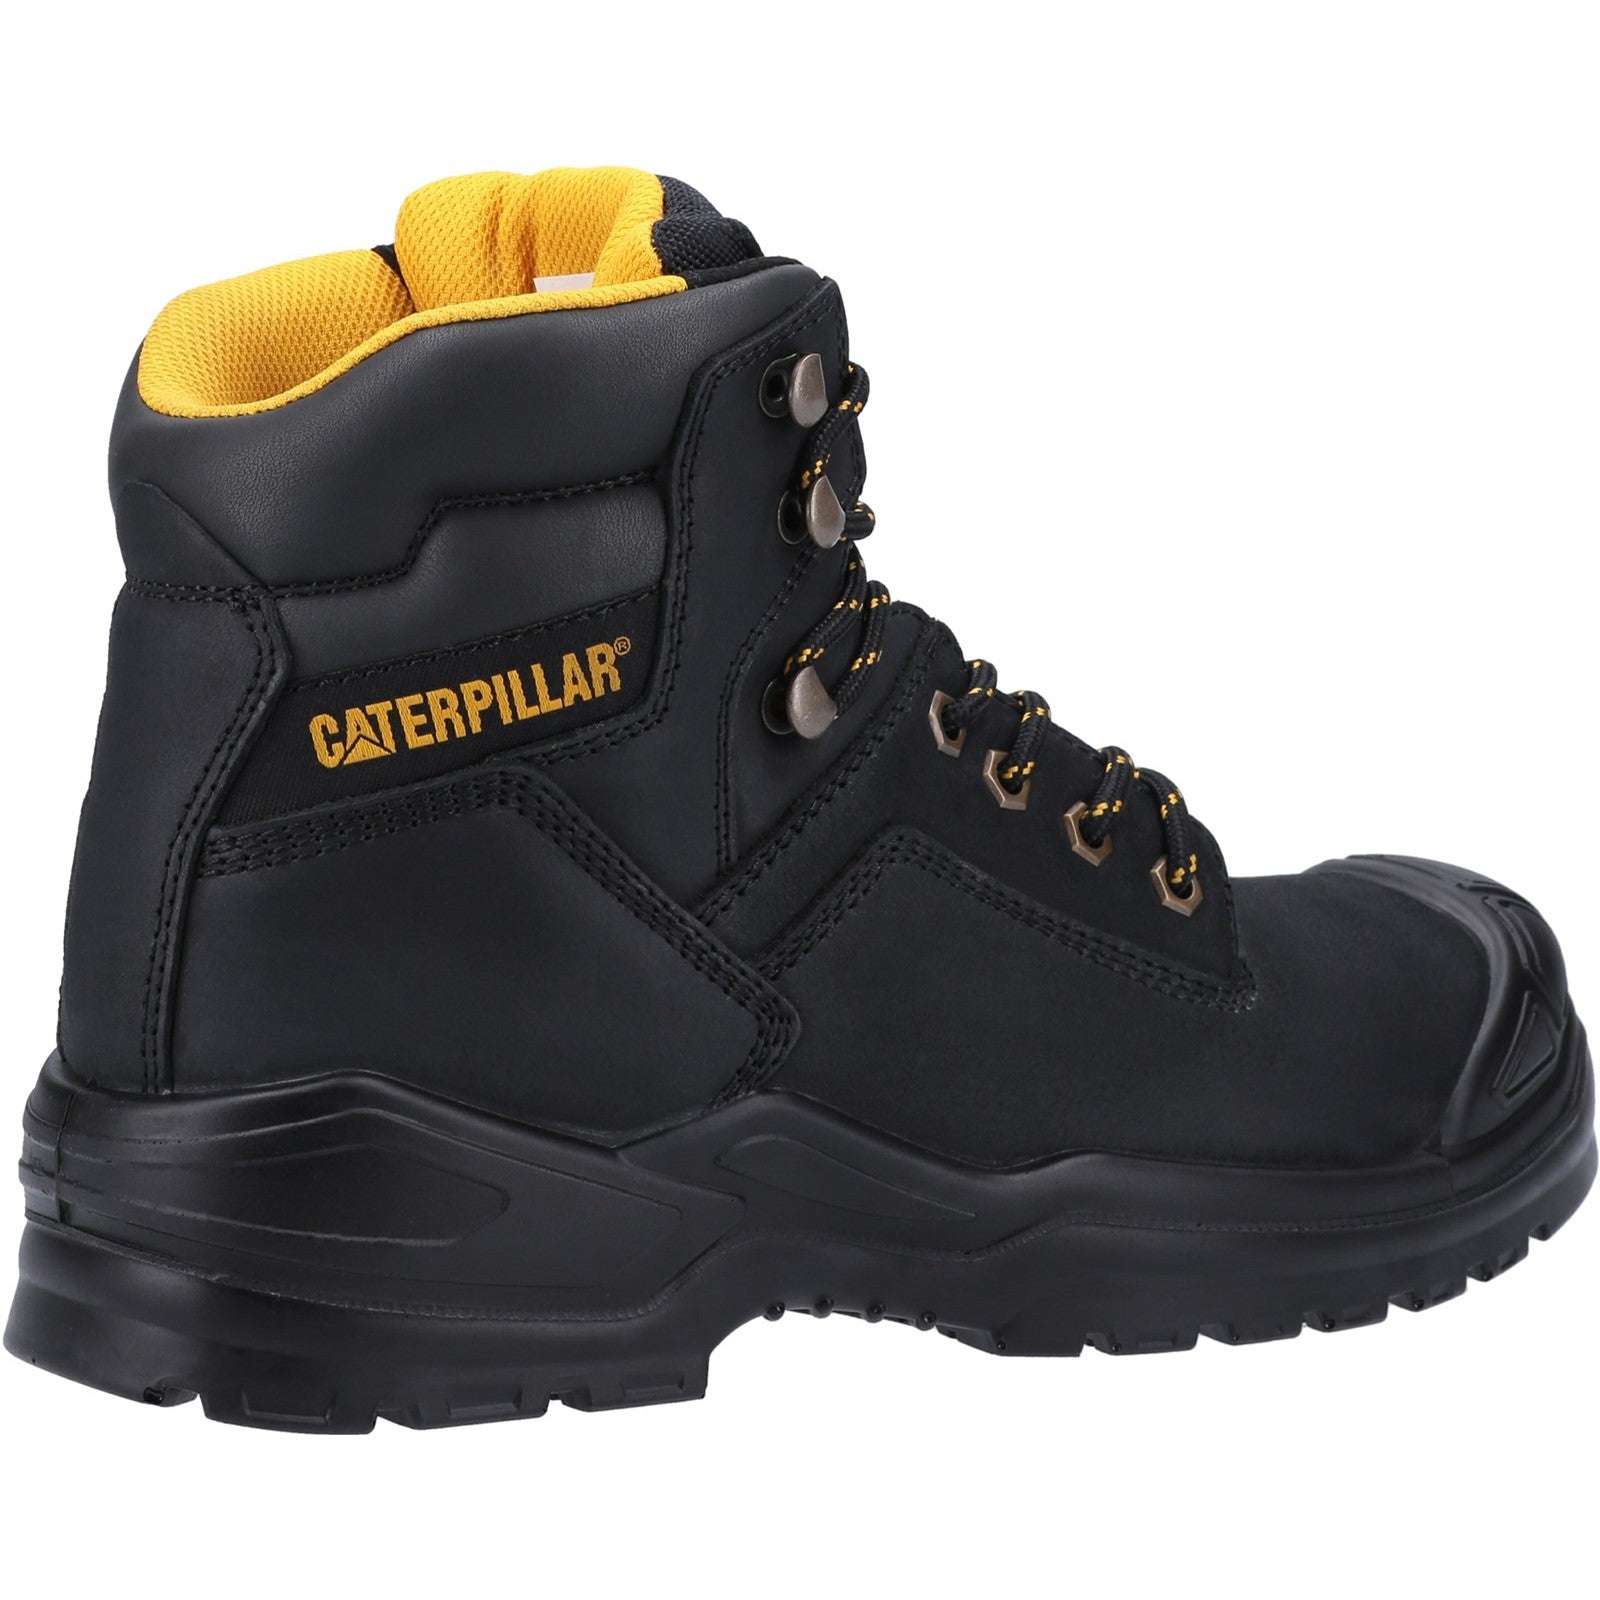 Caterpillar Striver Mid S3 Safety Boot